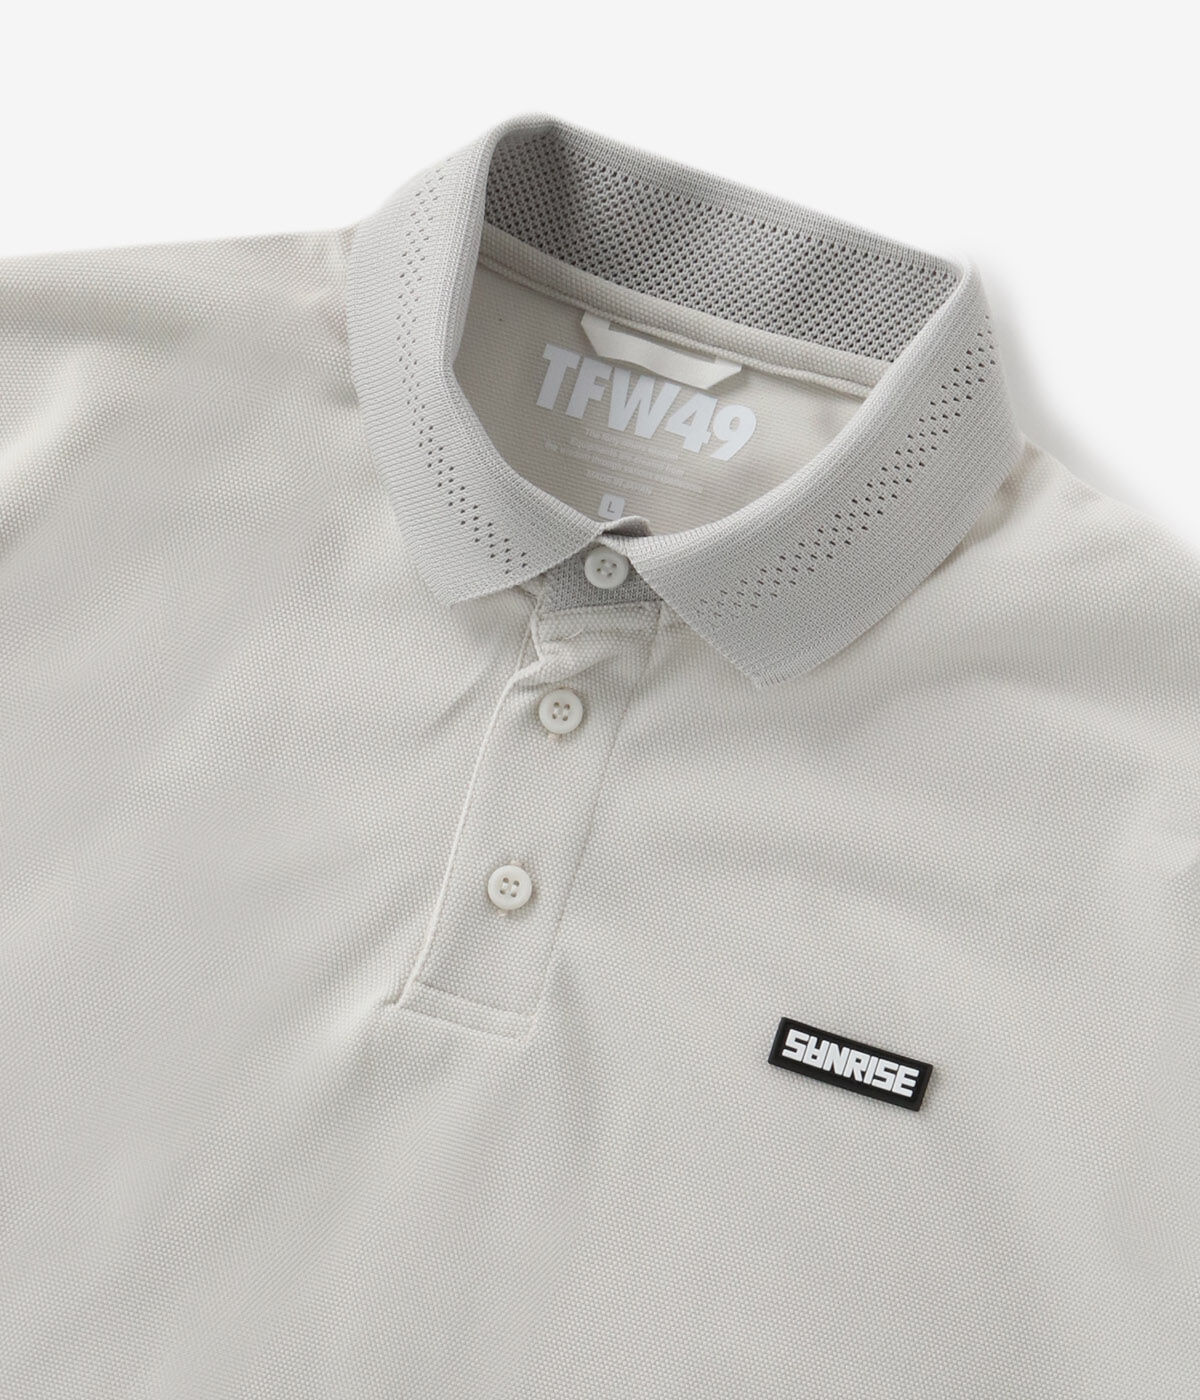 TFW49 RELAX POLO】 WHITE | SANRISE Online Store